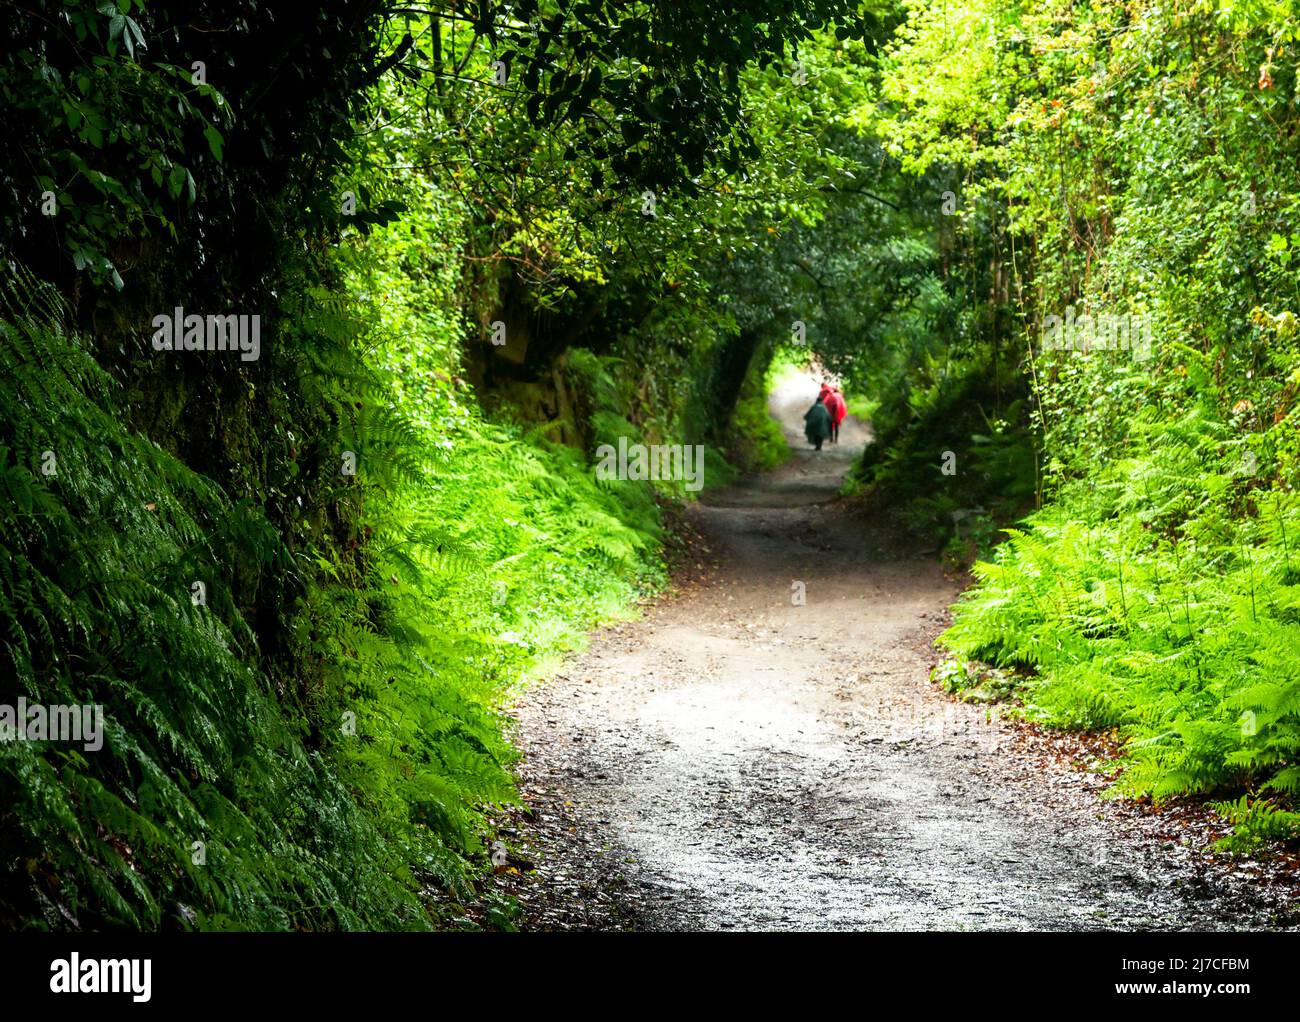 Two backpackers on a dirt road Stock Photo